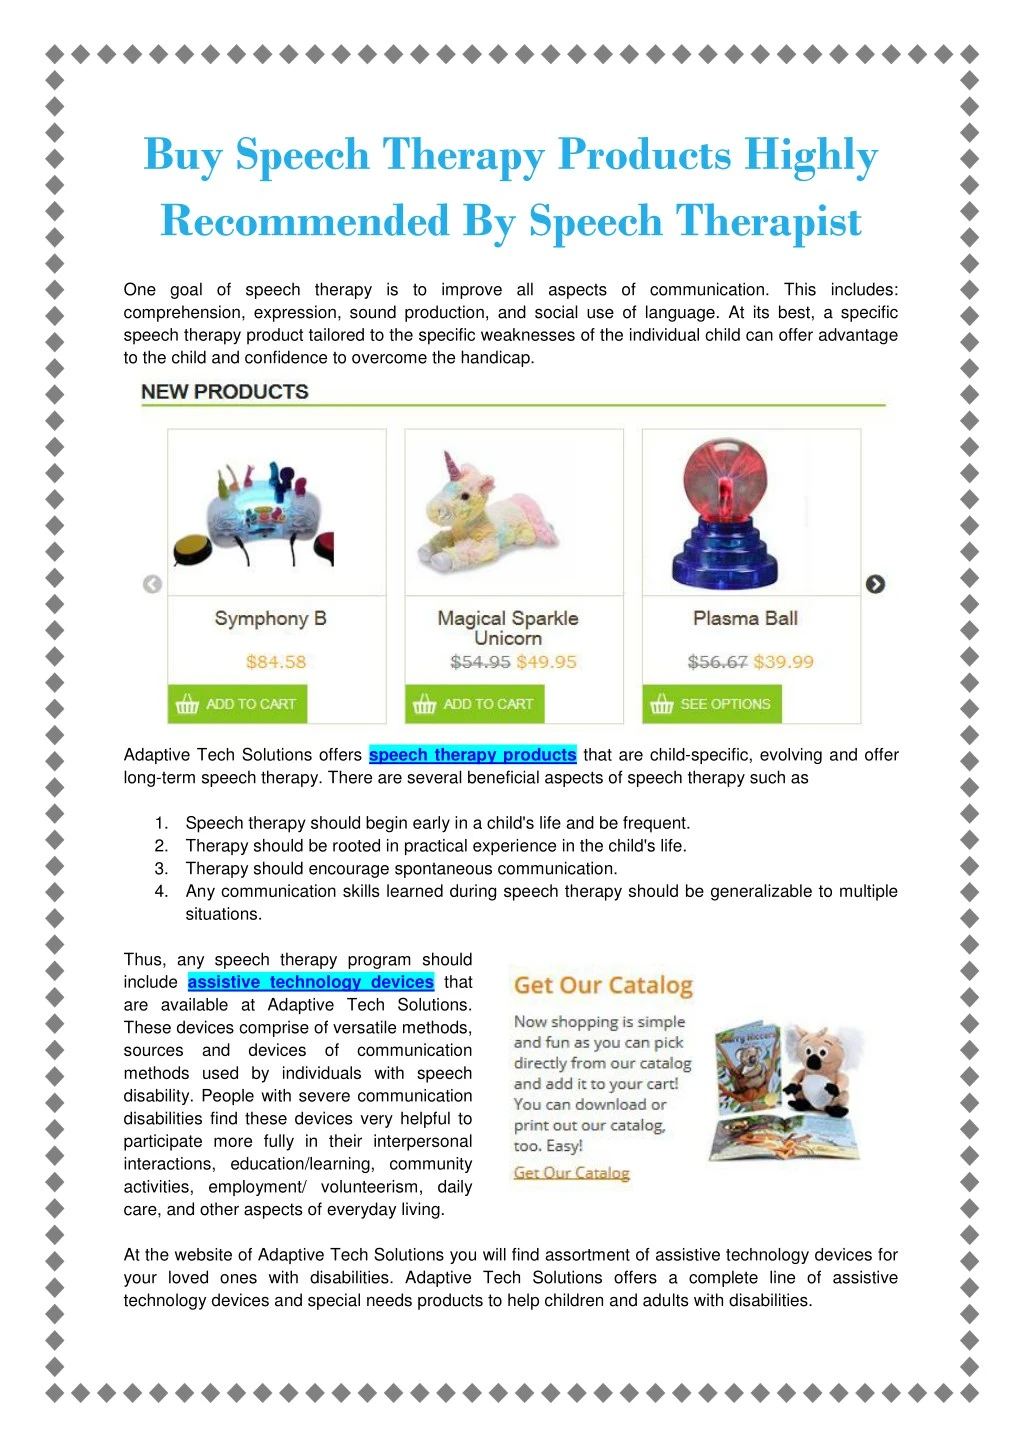 buy speech therapy products highly recommended